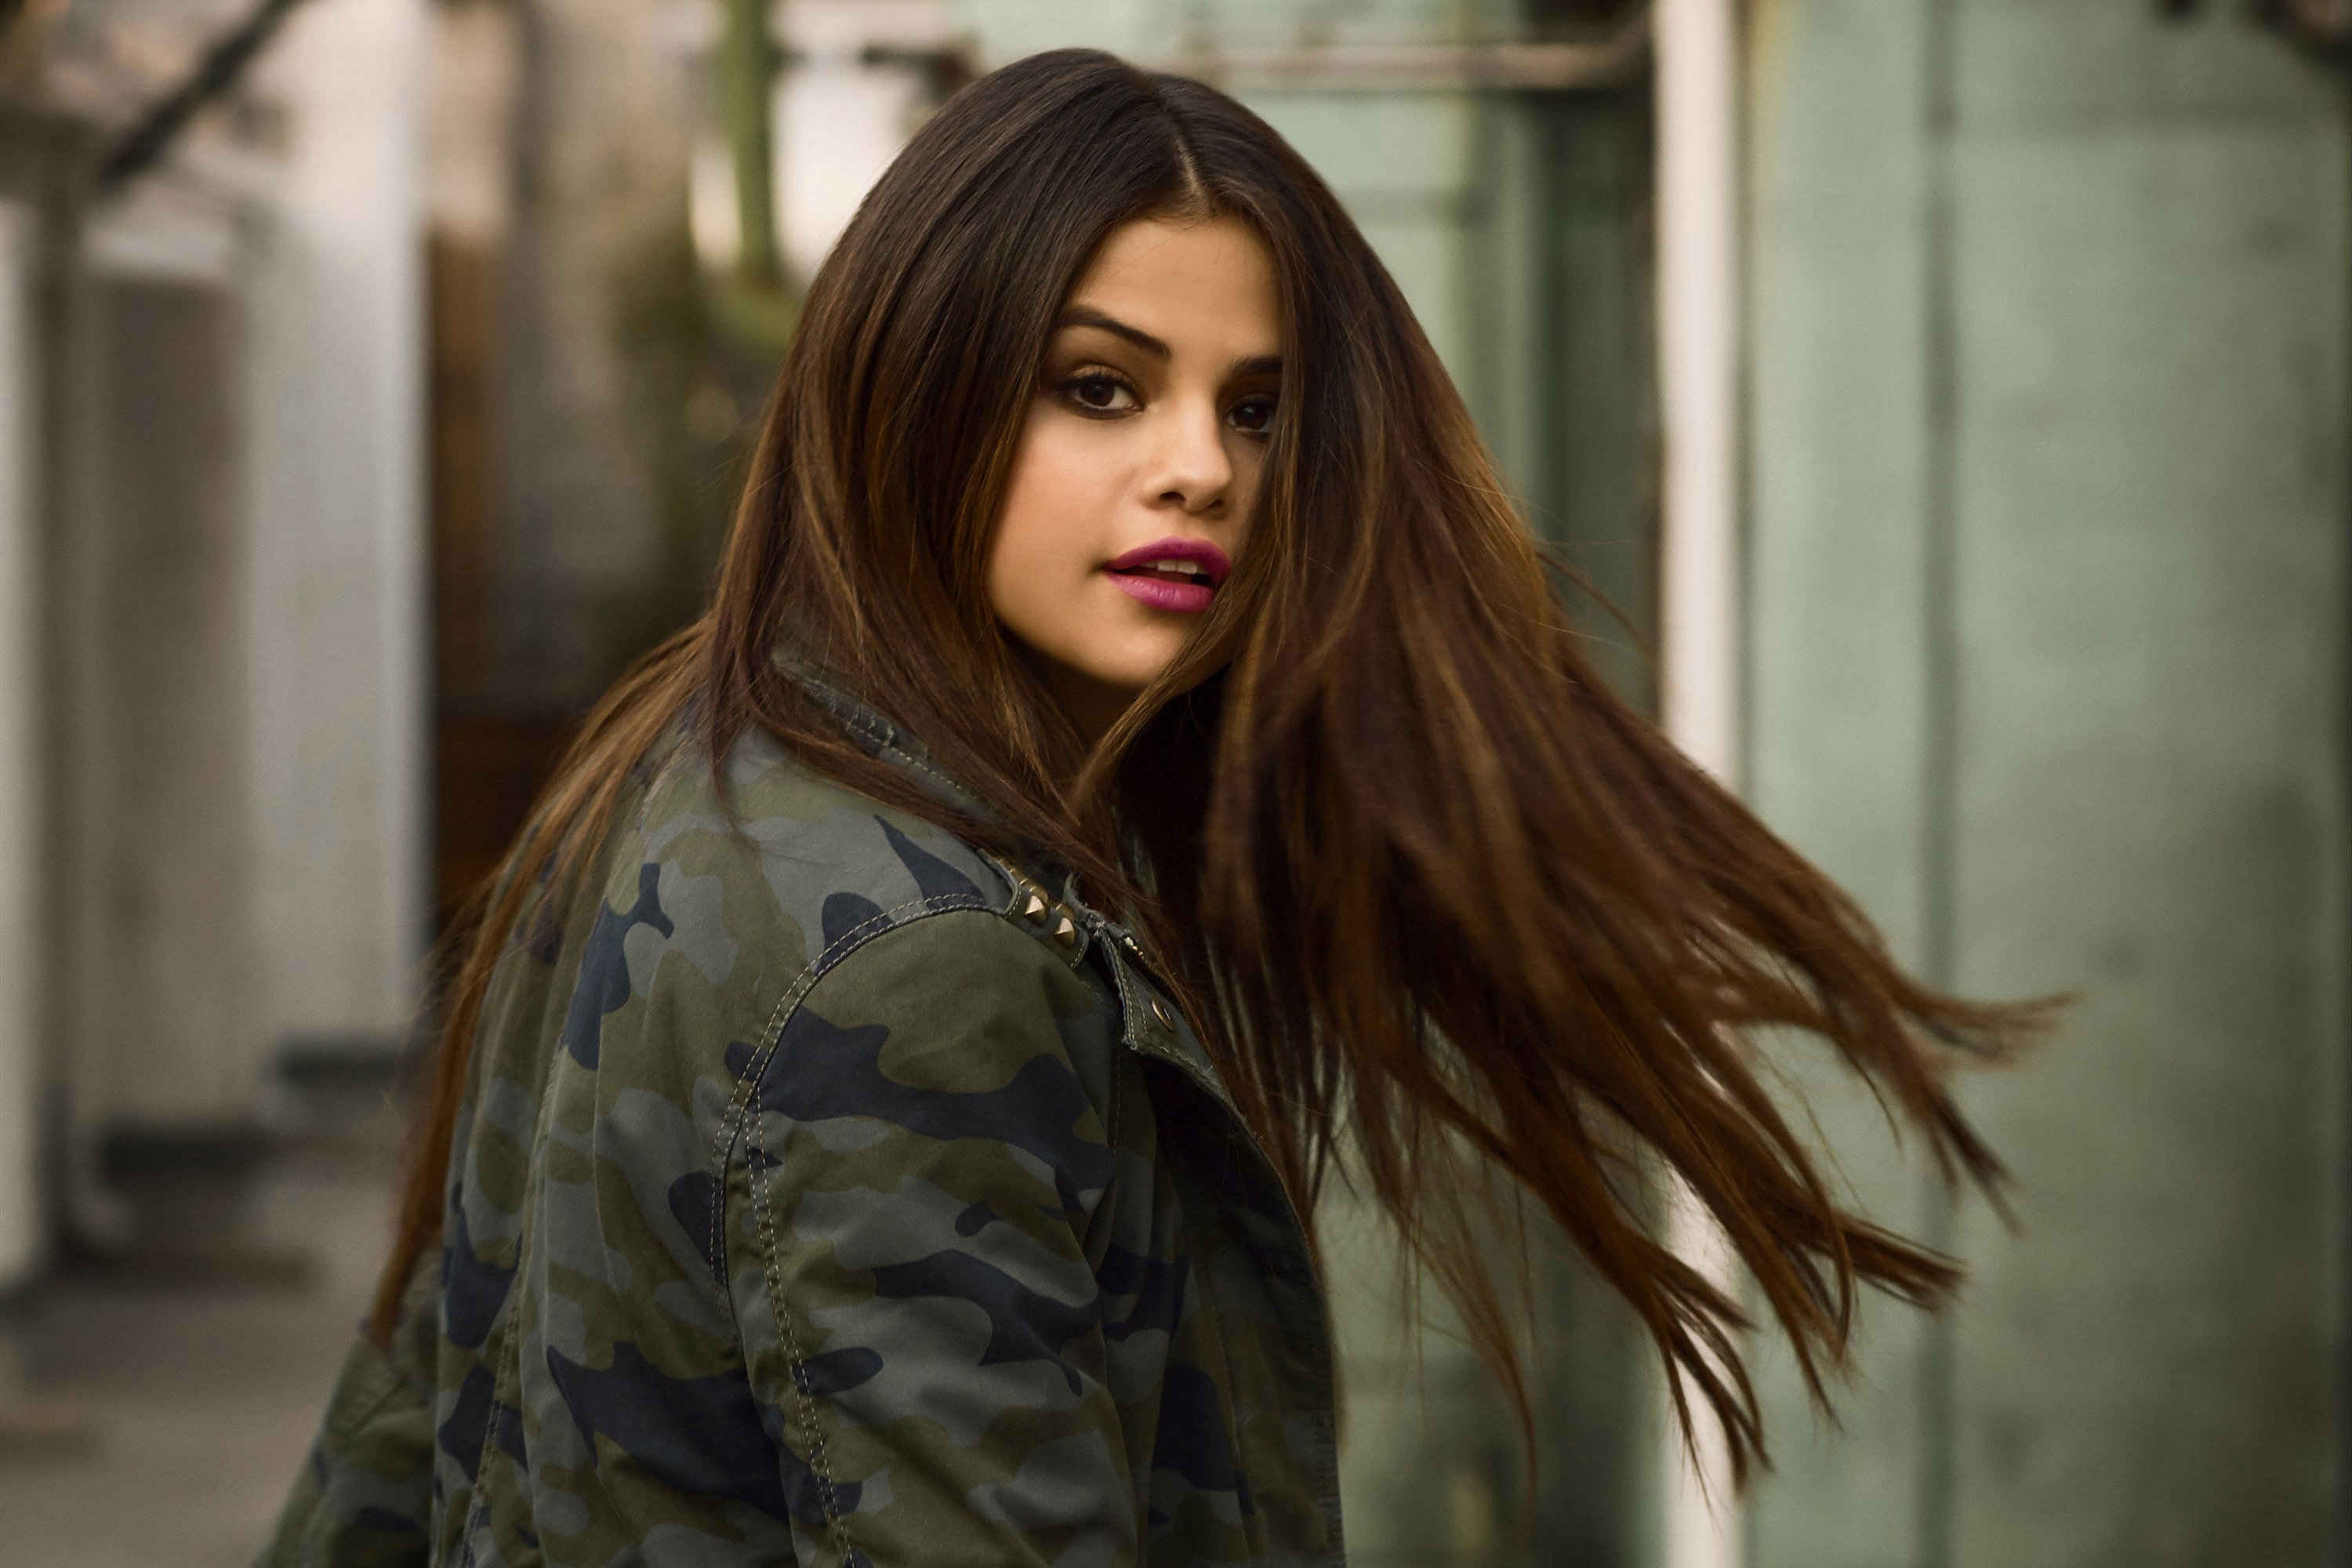 Selena Gomez 2017 New, HD Movies, 4k Wallpapers, Images ...